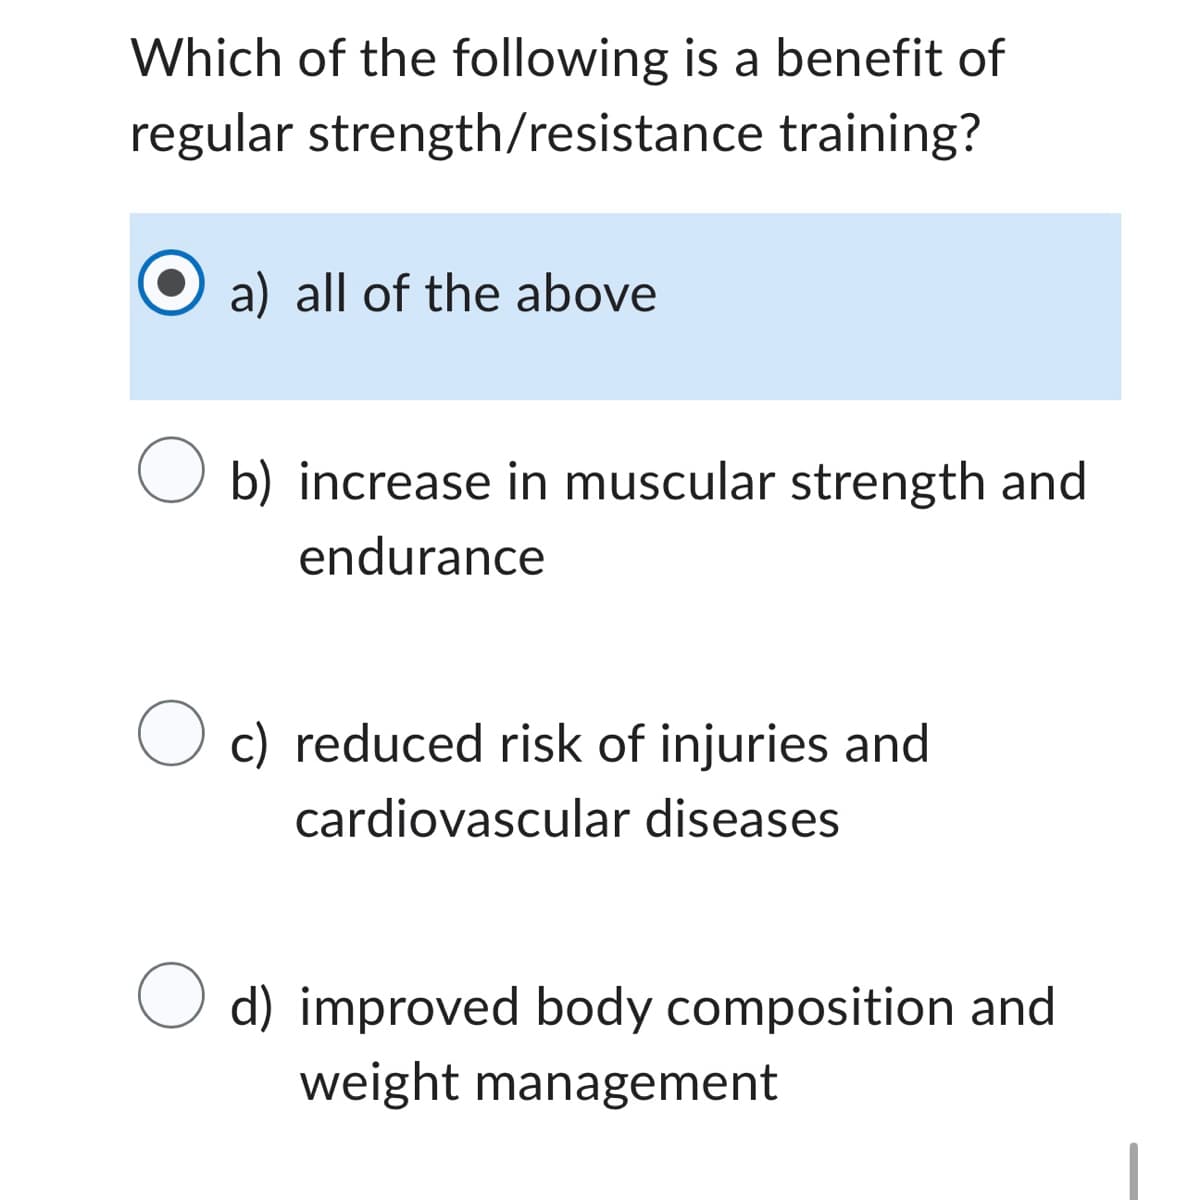 Which of the following is a benefit of
regular strength/resistance
training?
a) all of the above
O b) increase in muscular strength and
endurance
O c) reduced risk of injuries and
cardiovascular diseases
O d) improved body composition and
weight management